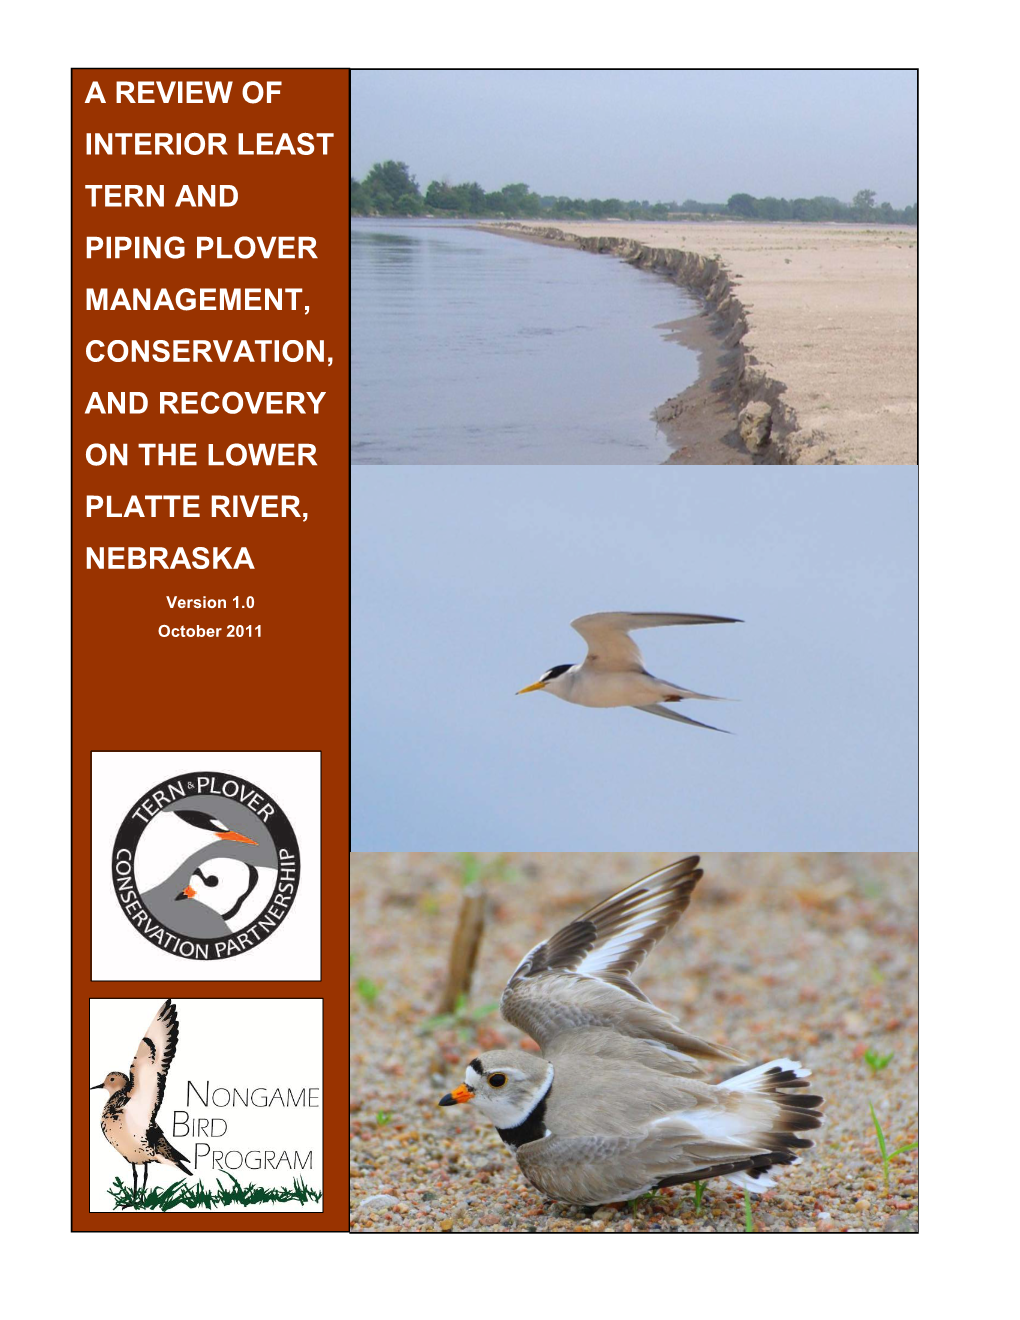 Interior Least Tern and Piping Plover Policy Review